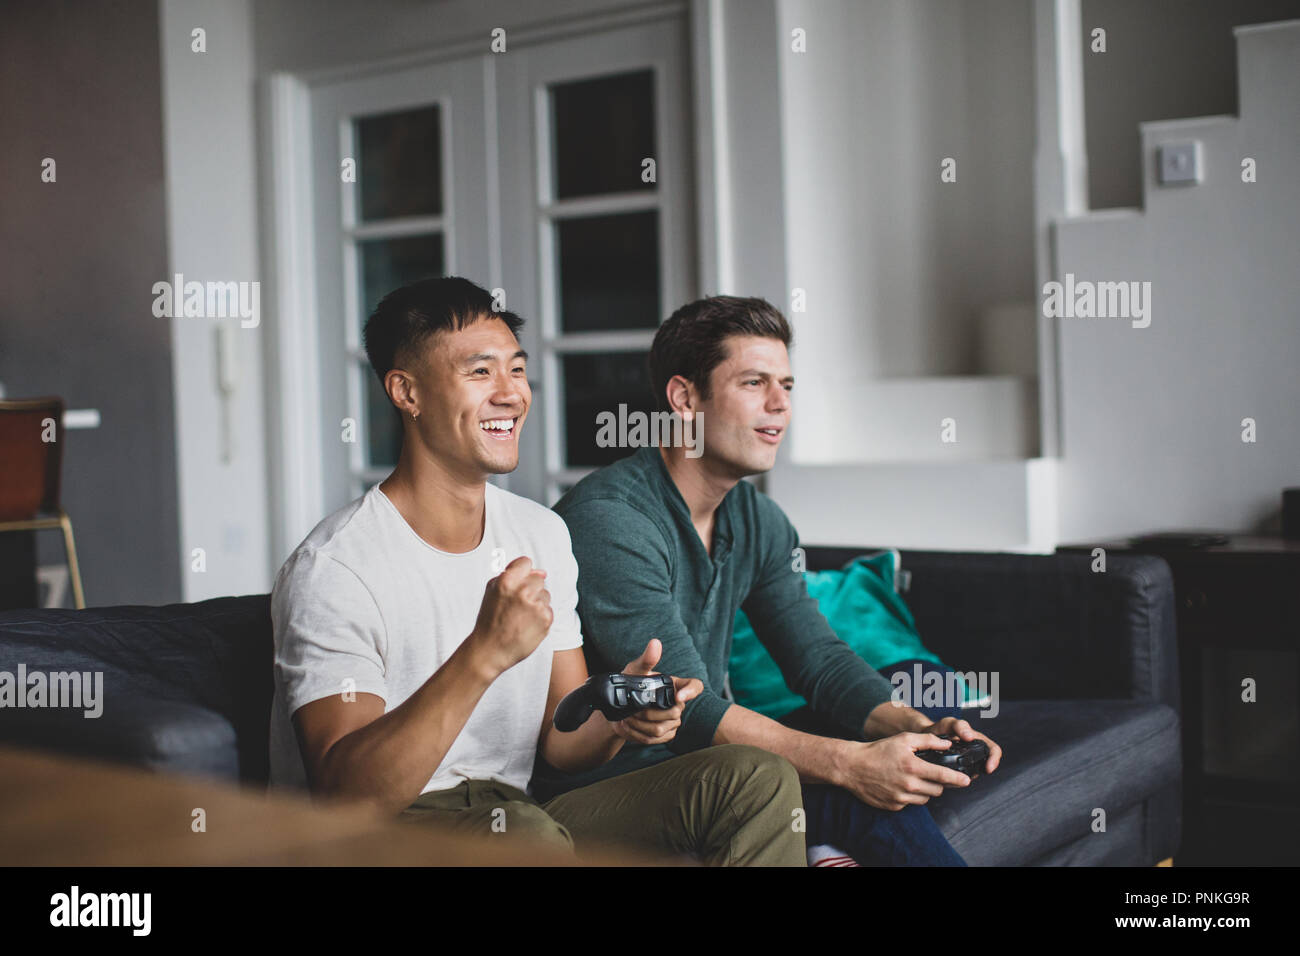 Male friends playing on a games console Stock Photo